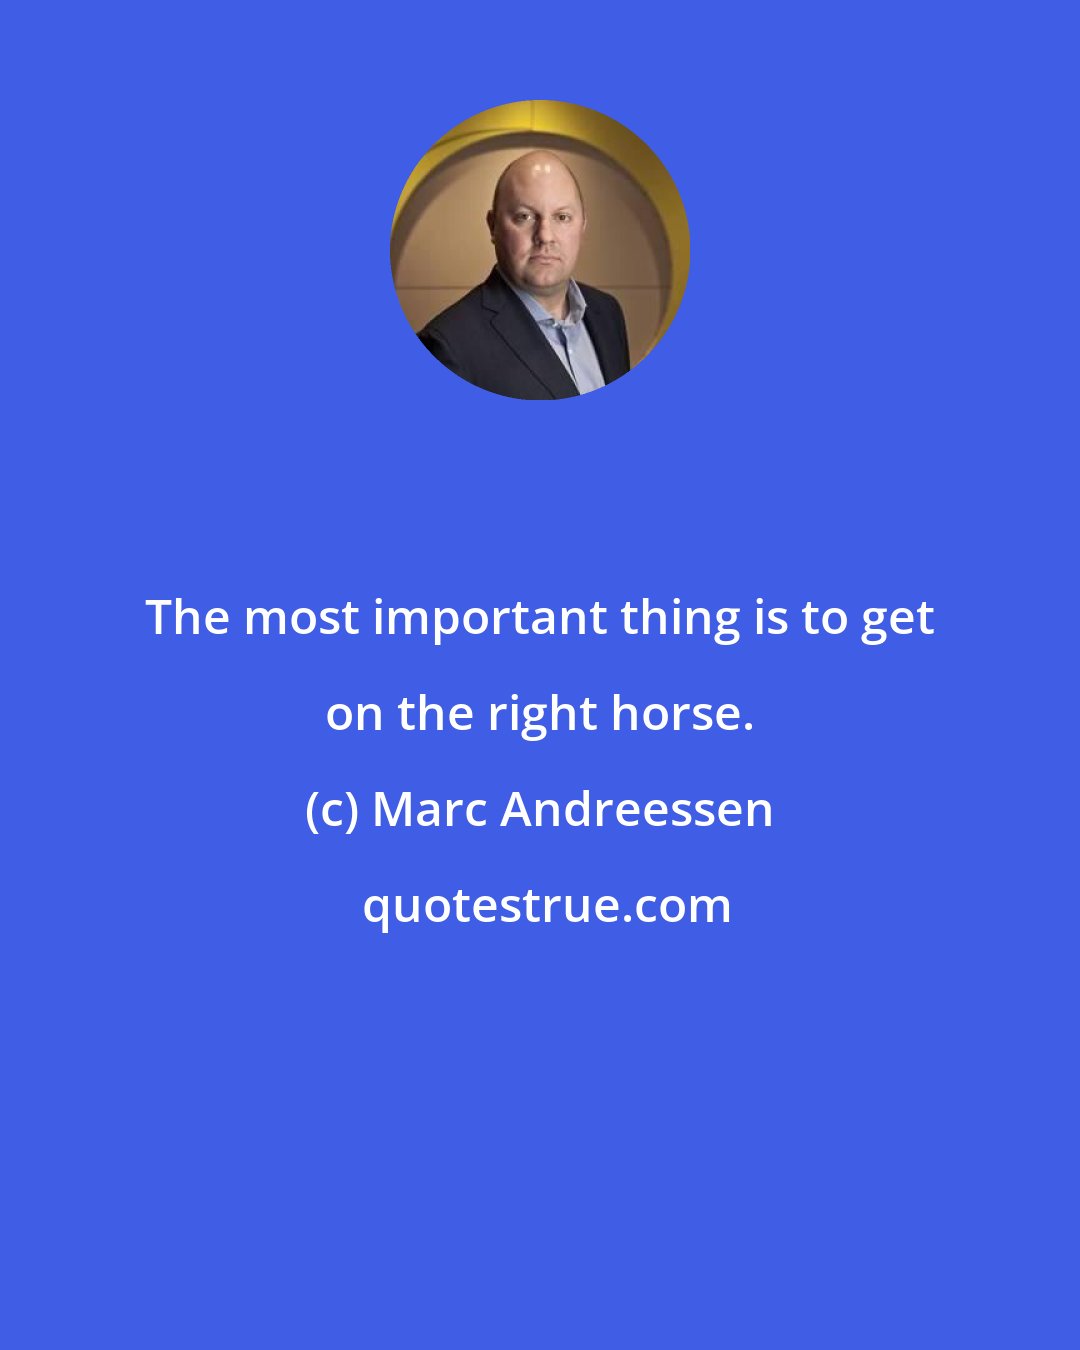 Marc Andreessen: The most important thing is to get on the right horse.